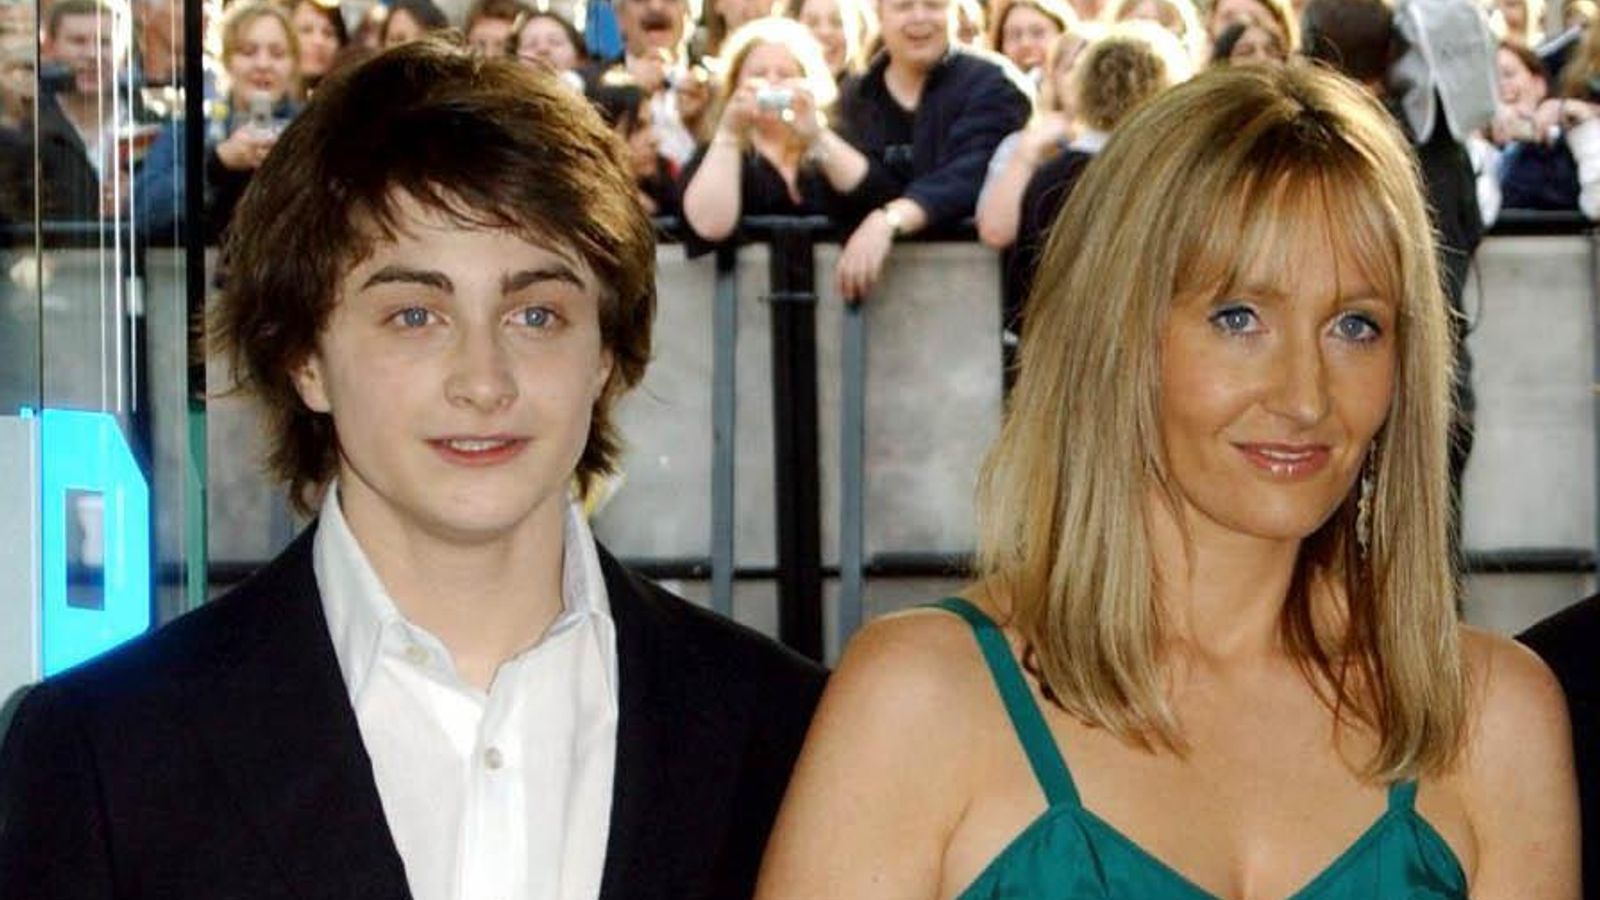 Harry Potter star Daniel Radcliffe makes rare comment on fallout with JK Rowling over her transgender views